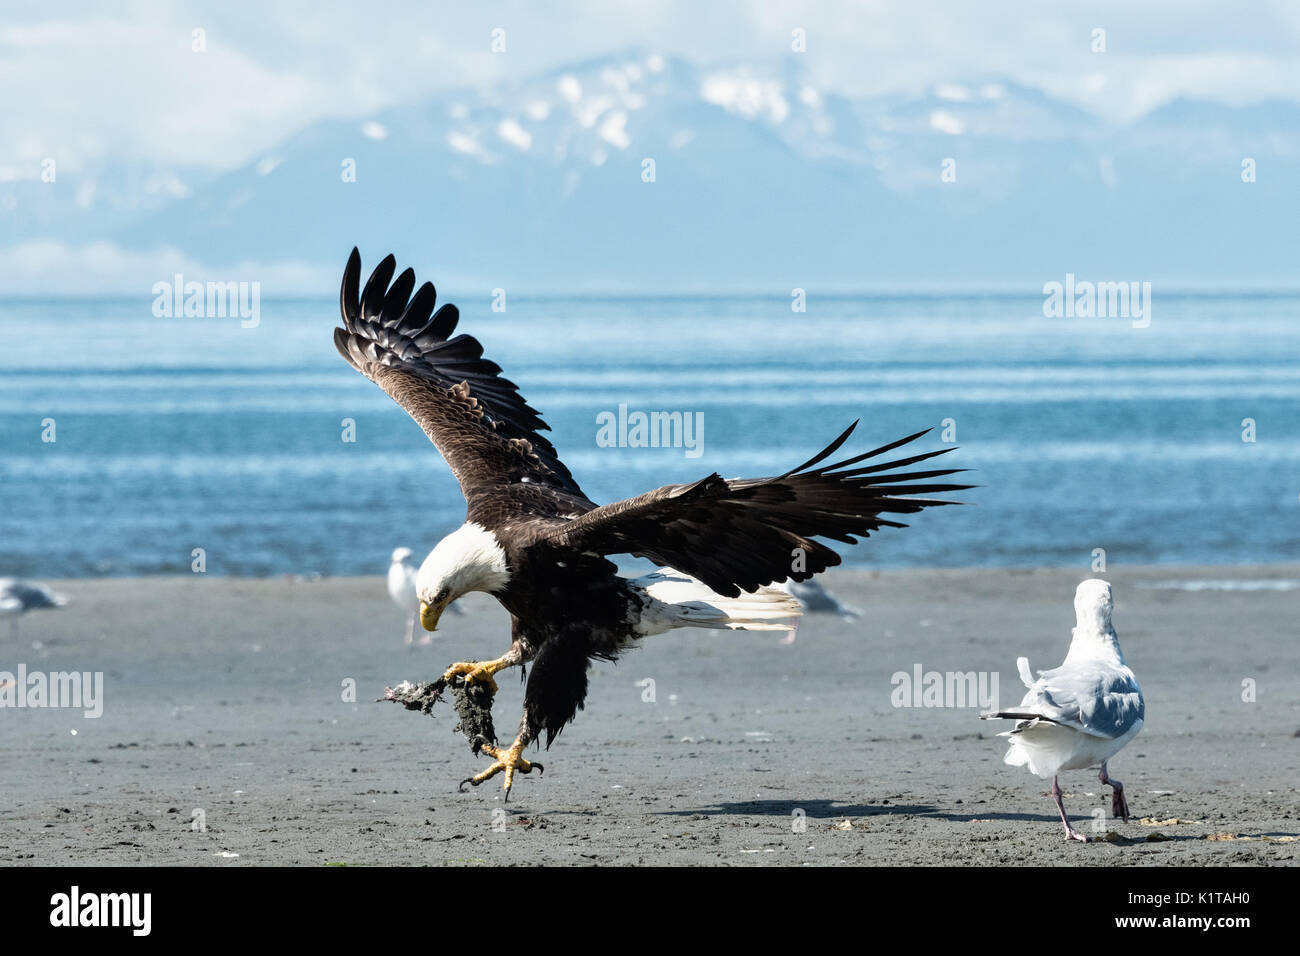 A bald eagle carries fish scraps surrounded by gulls on the beach at Anchor Point, Alaska. Stock Photo